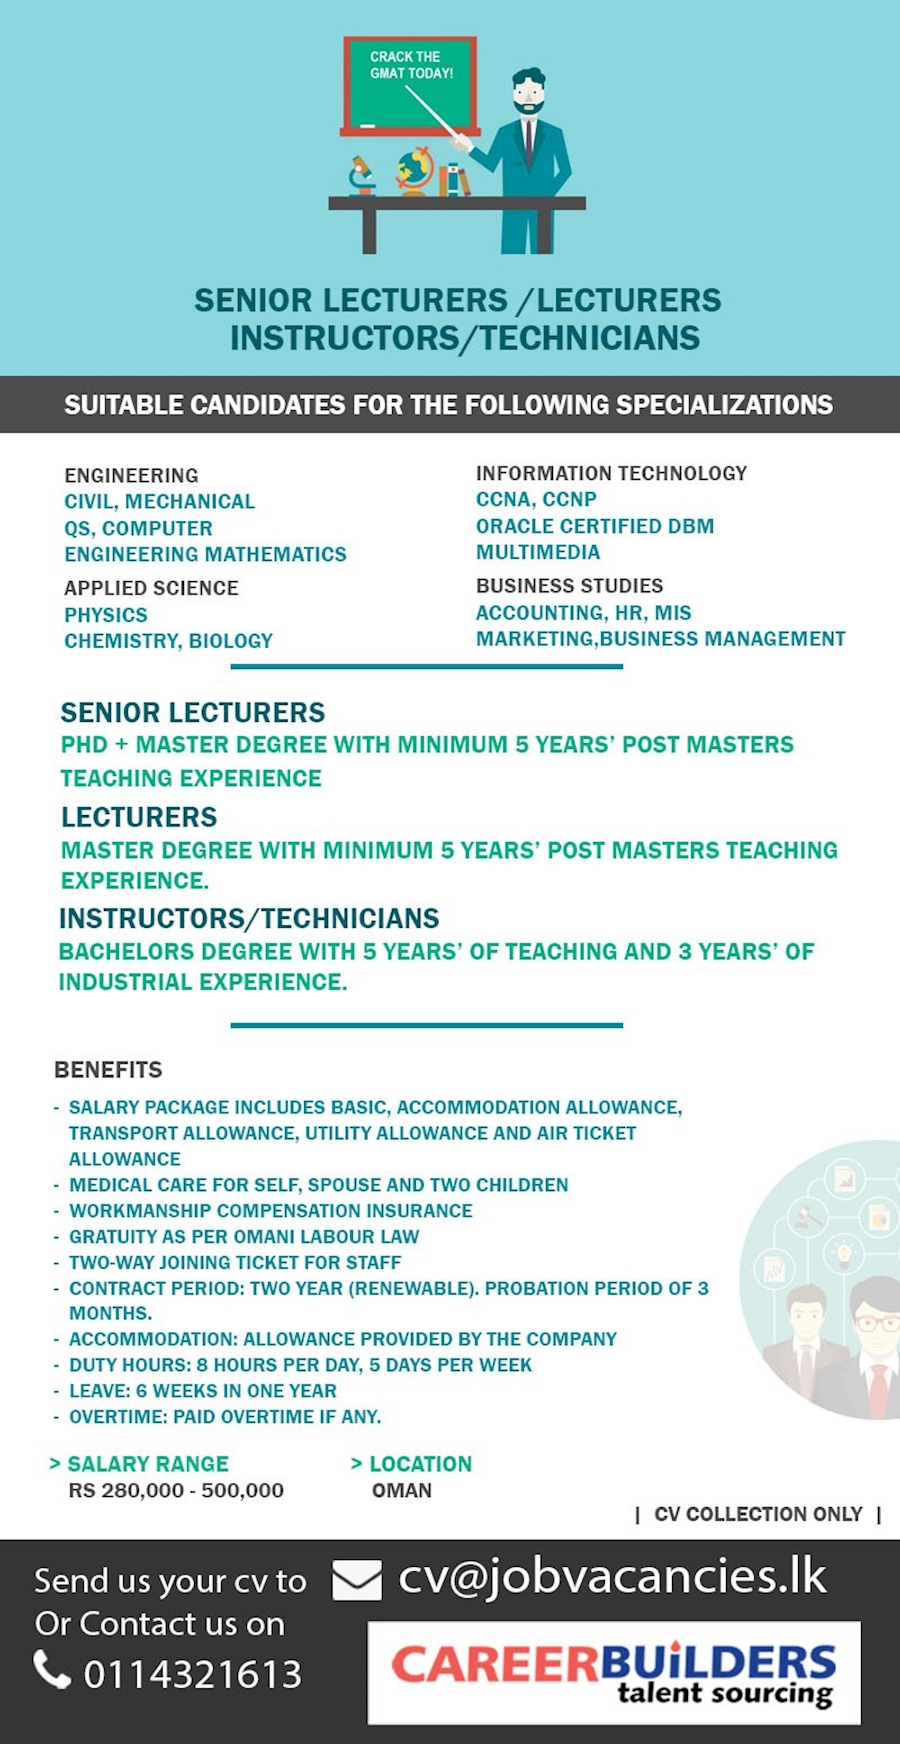 Senior lectures or Lectures Instructors or Technicians 